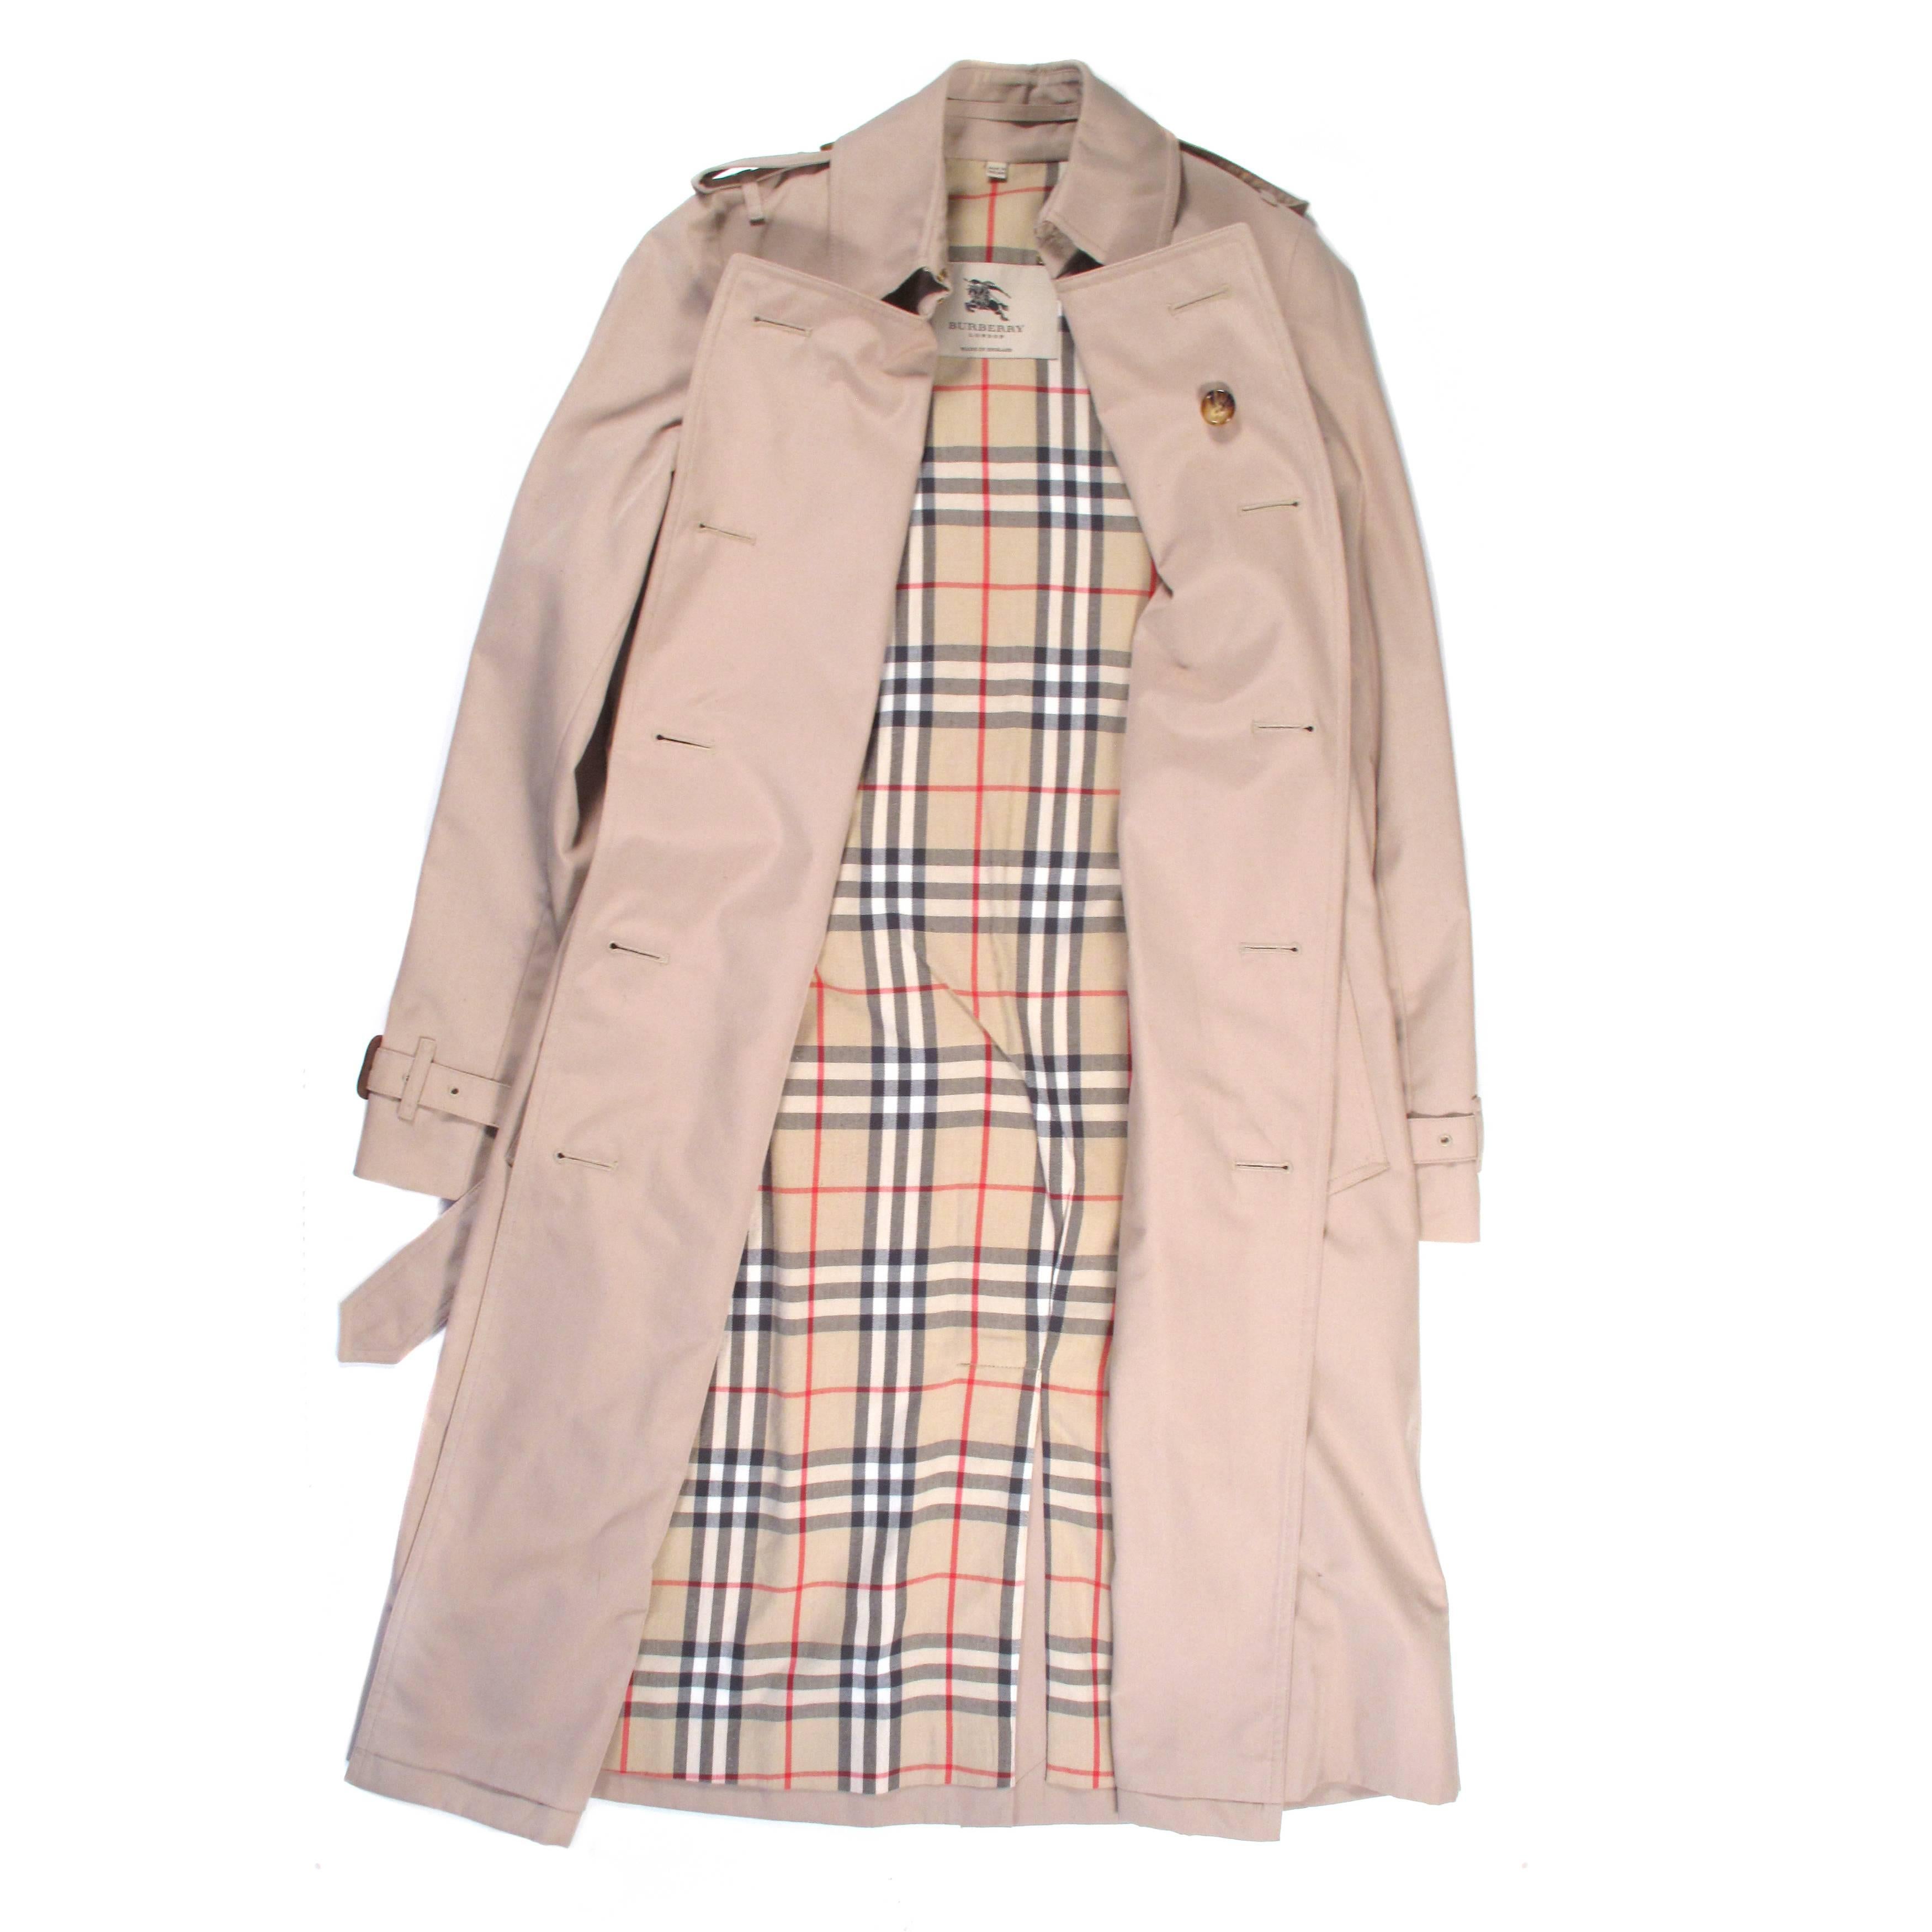 Burberry - Belted Trench Coat

Tag Size:  tag removed - fits like a US: 2 / 4  - Euro: 34 / 36

Color:  Tan

Material: Cotton Blend

------------------------------------------------------------

Details:

- adjustable belt around